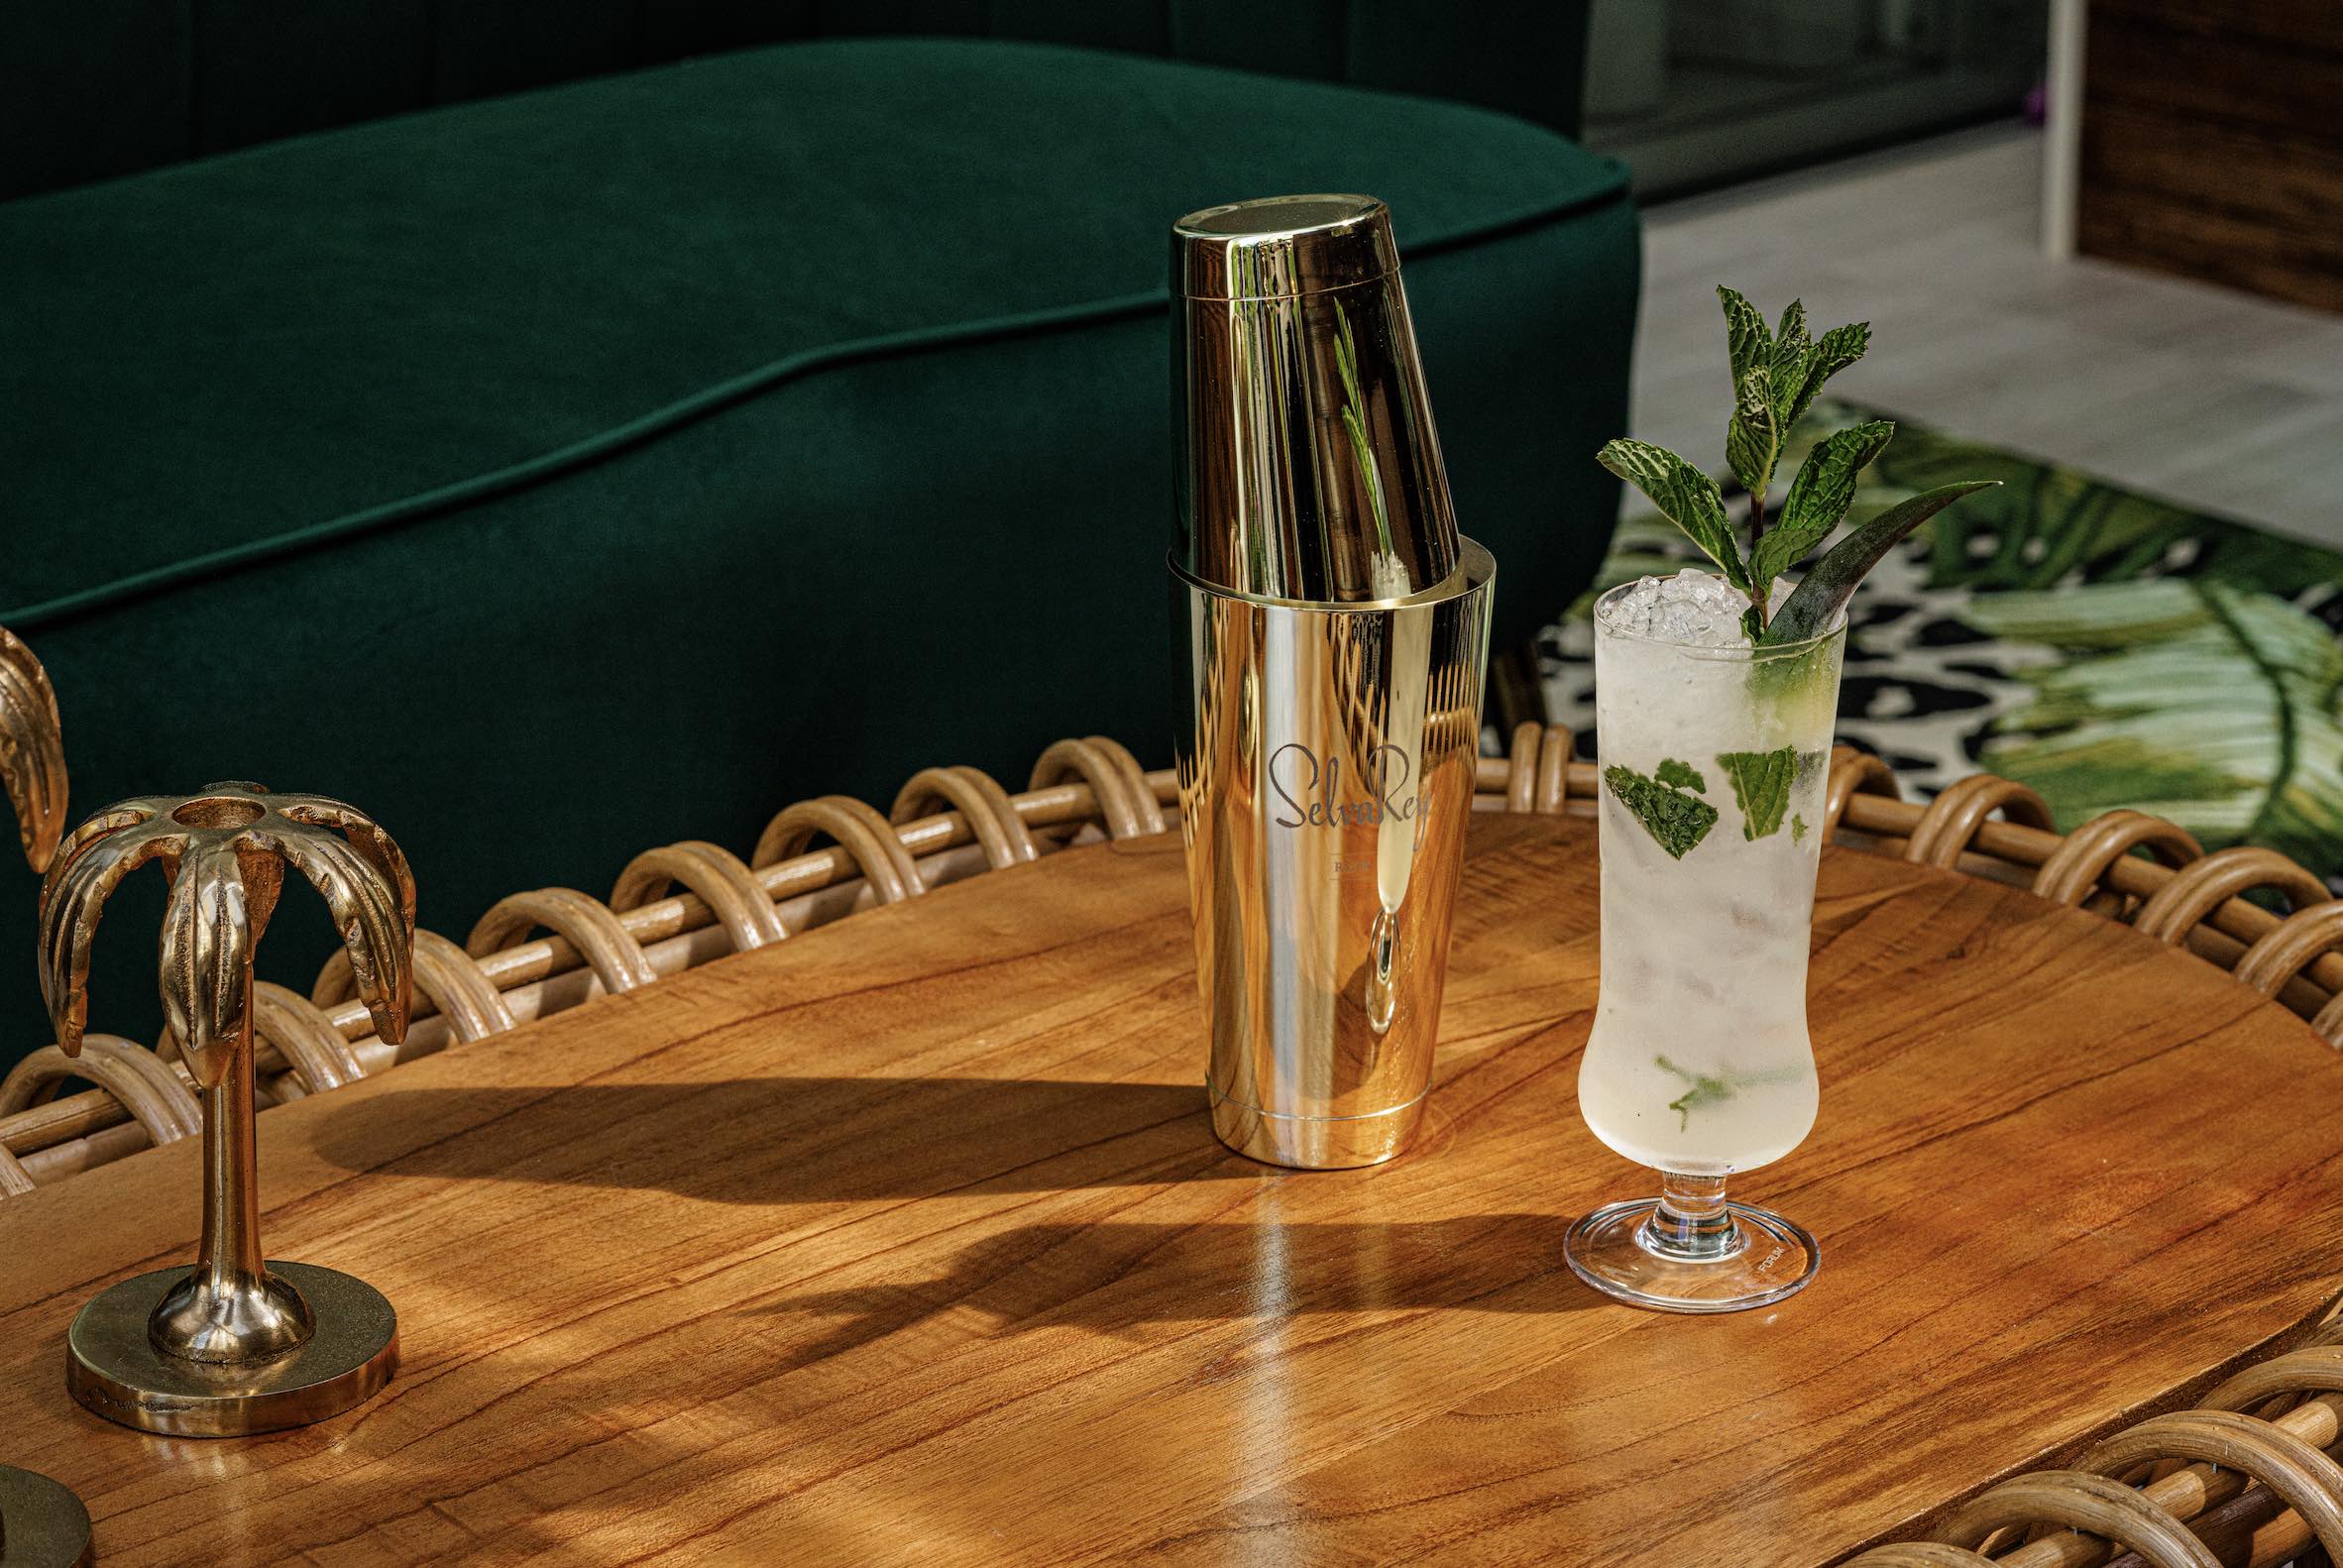 An image of a mojito made with SelvaRey Rum.